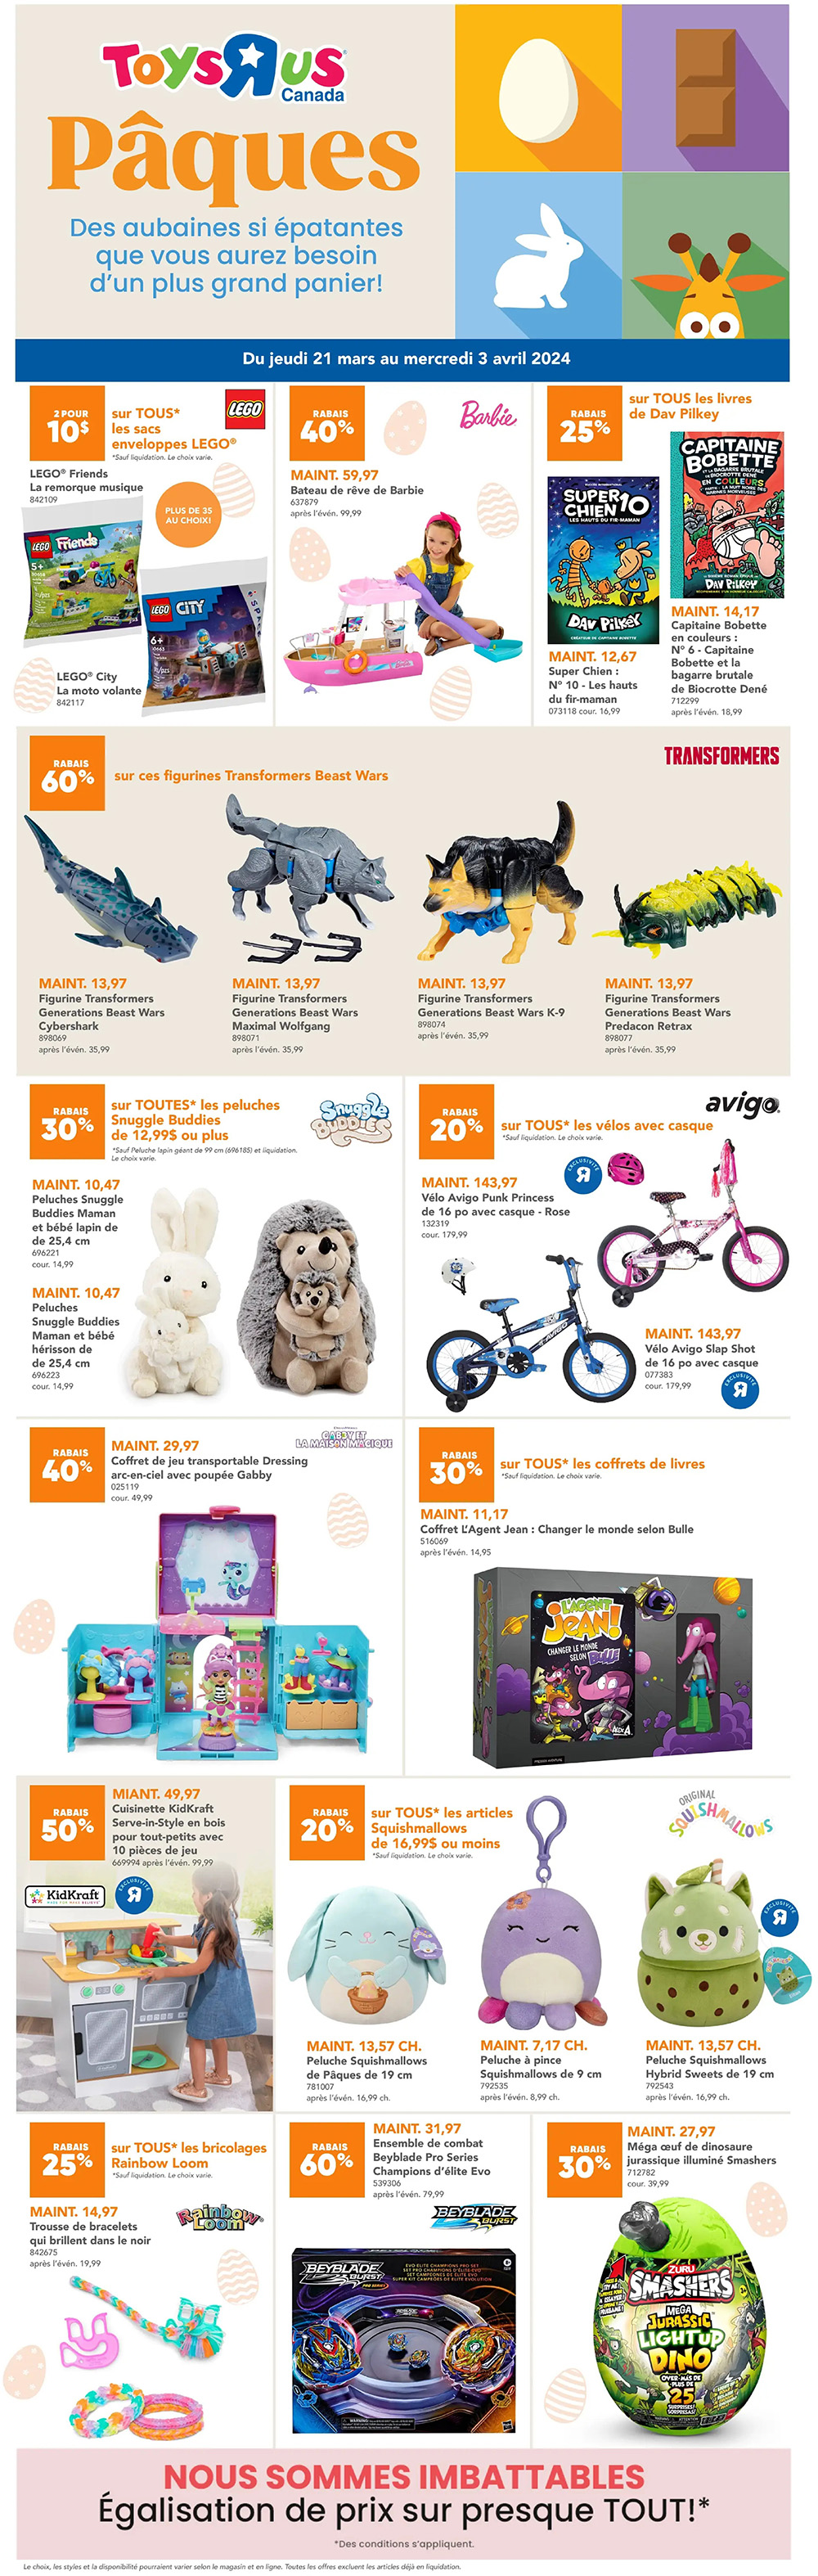 Circulaire Toys 'R' us - Page 1